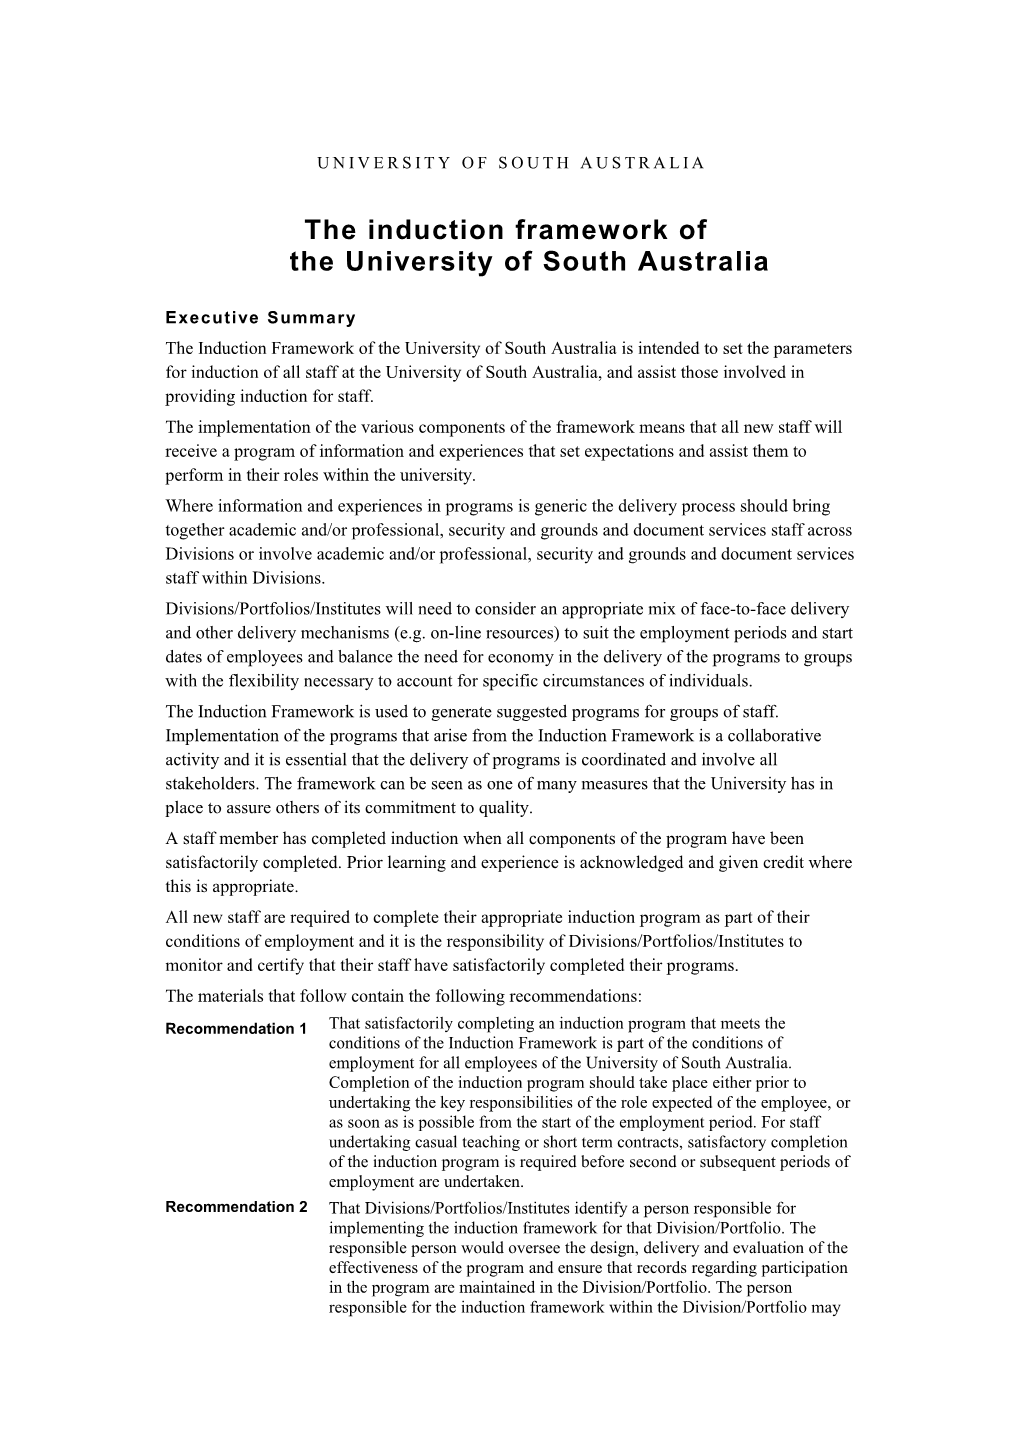 The Induction Framework of the University of South Australia